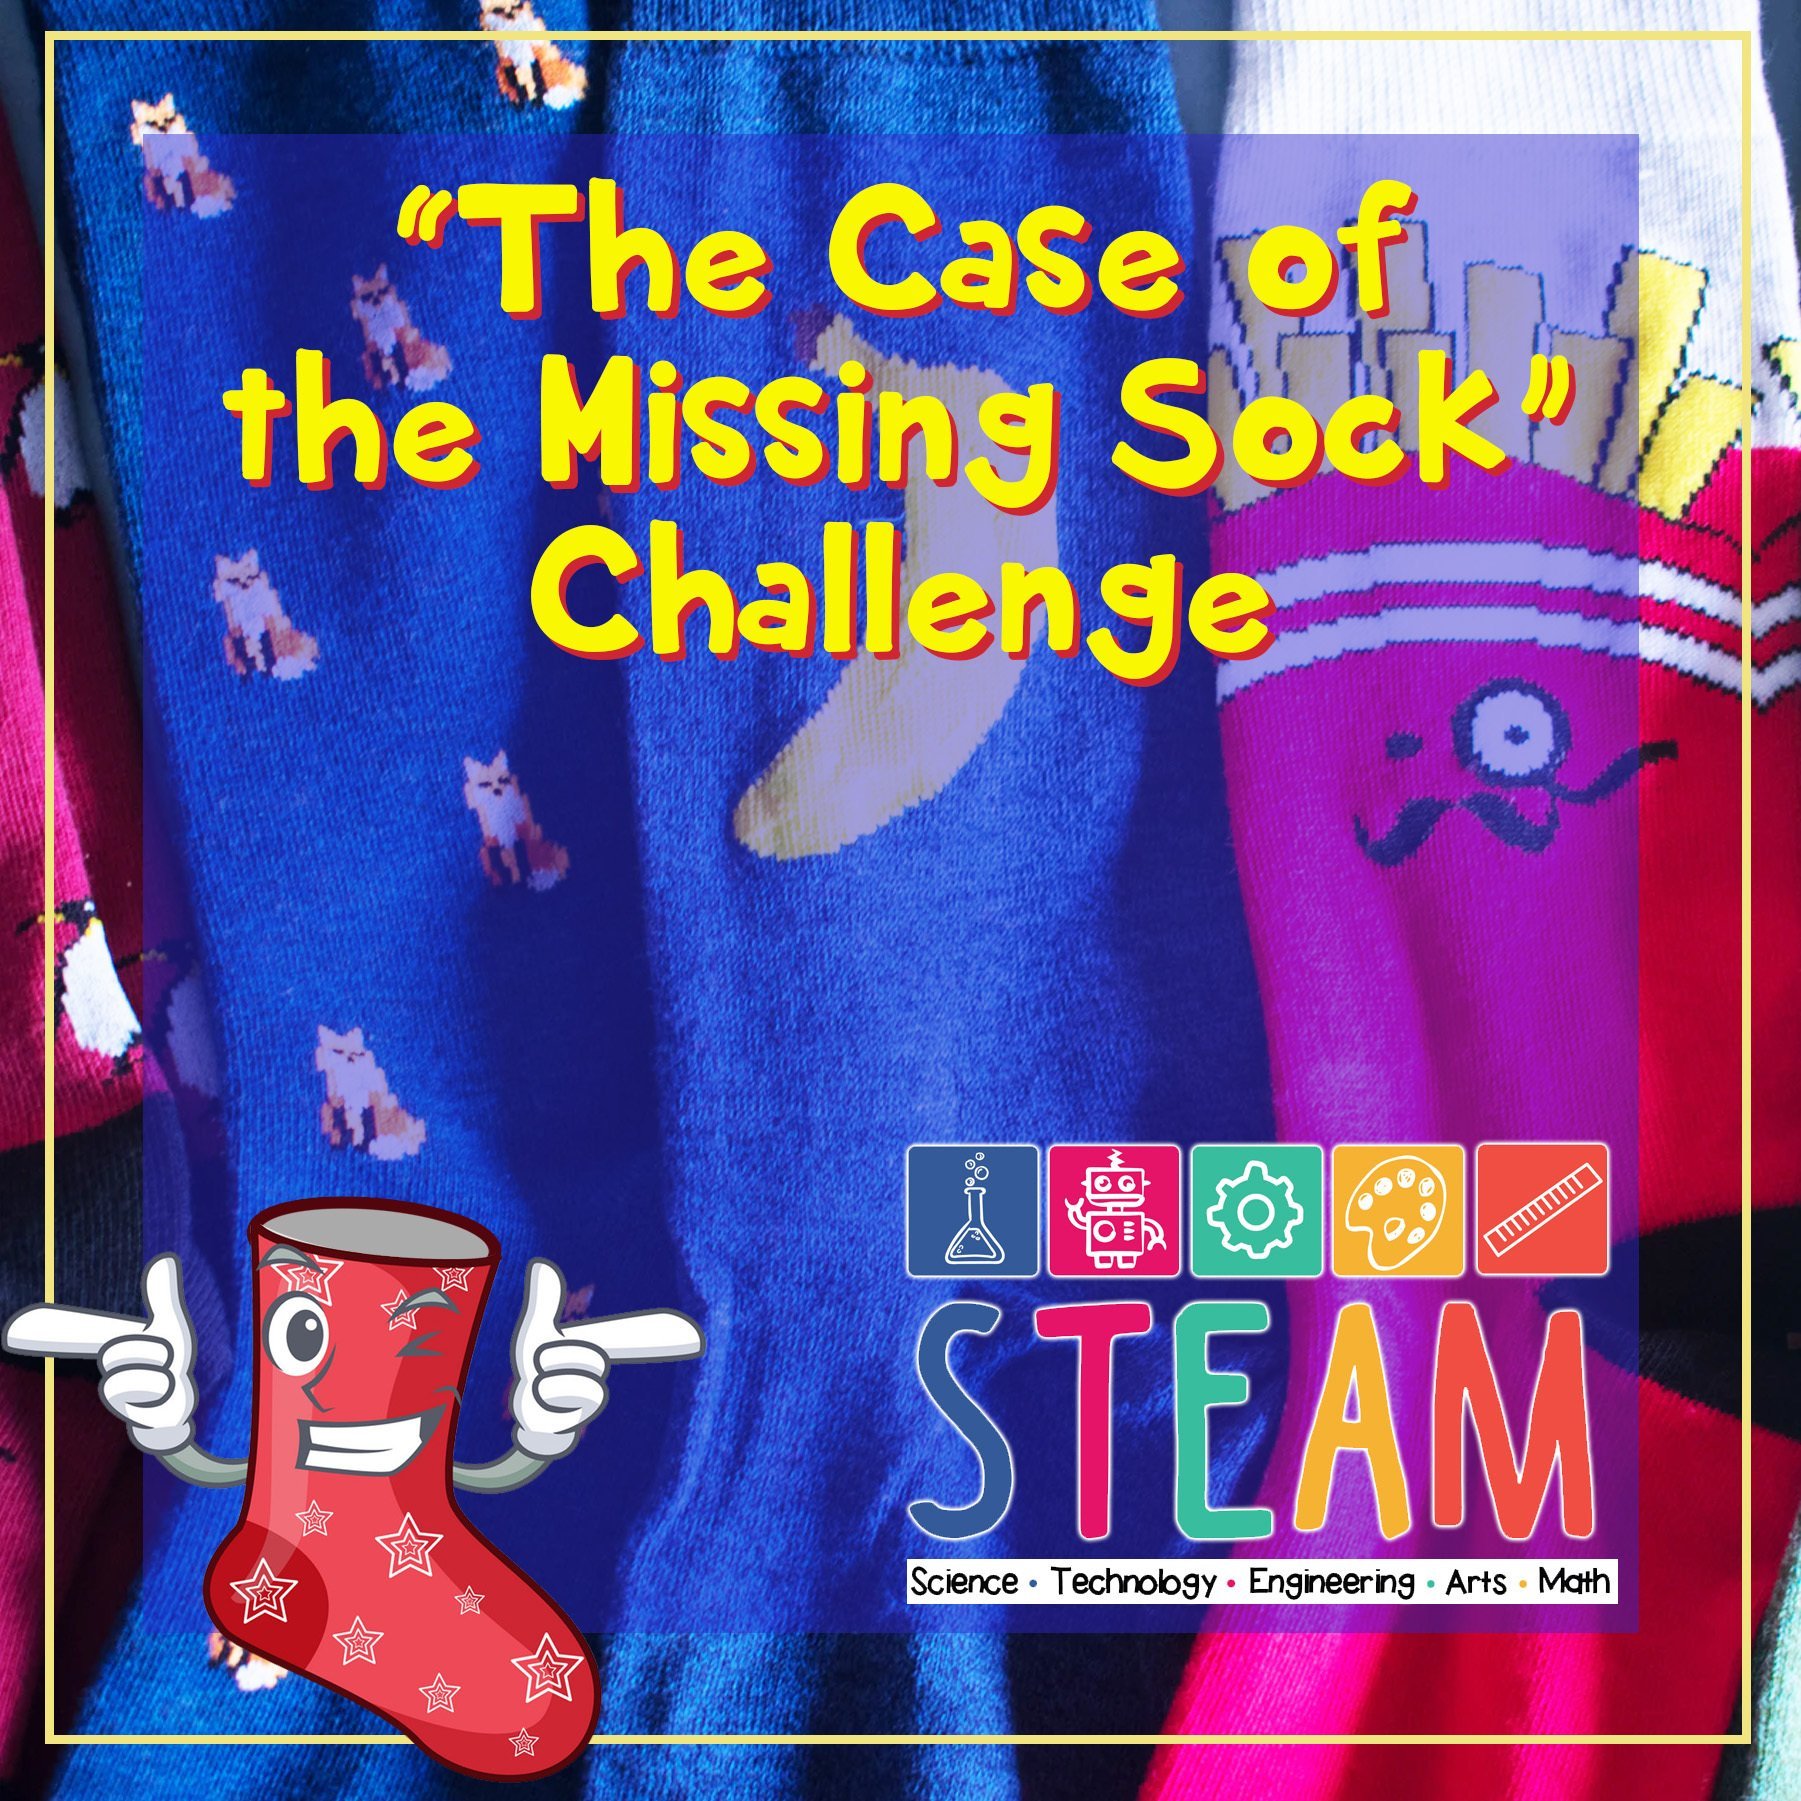 The Case of the Missing Sock Challenge